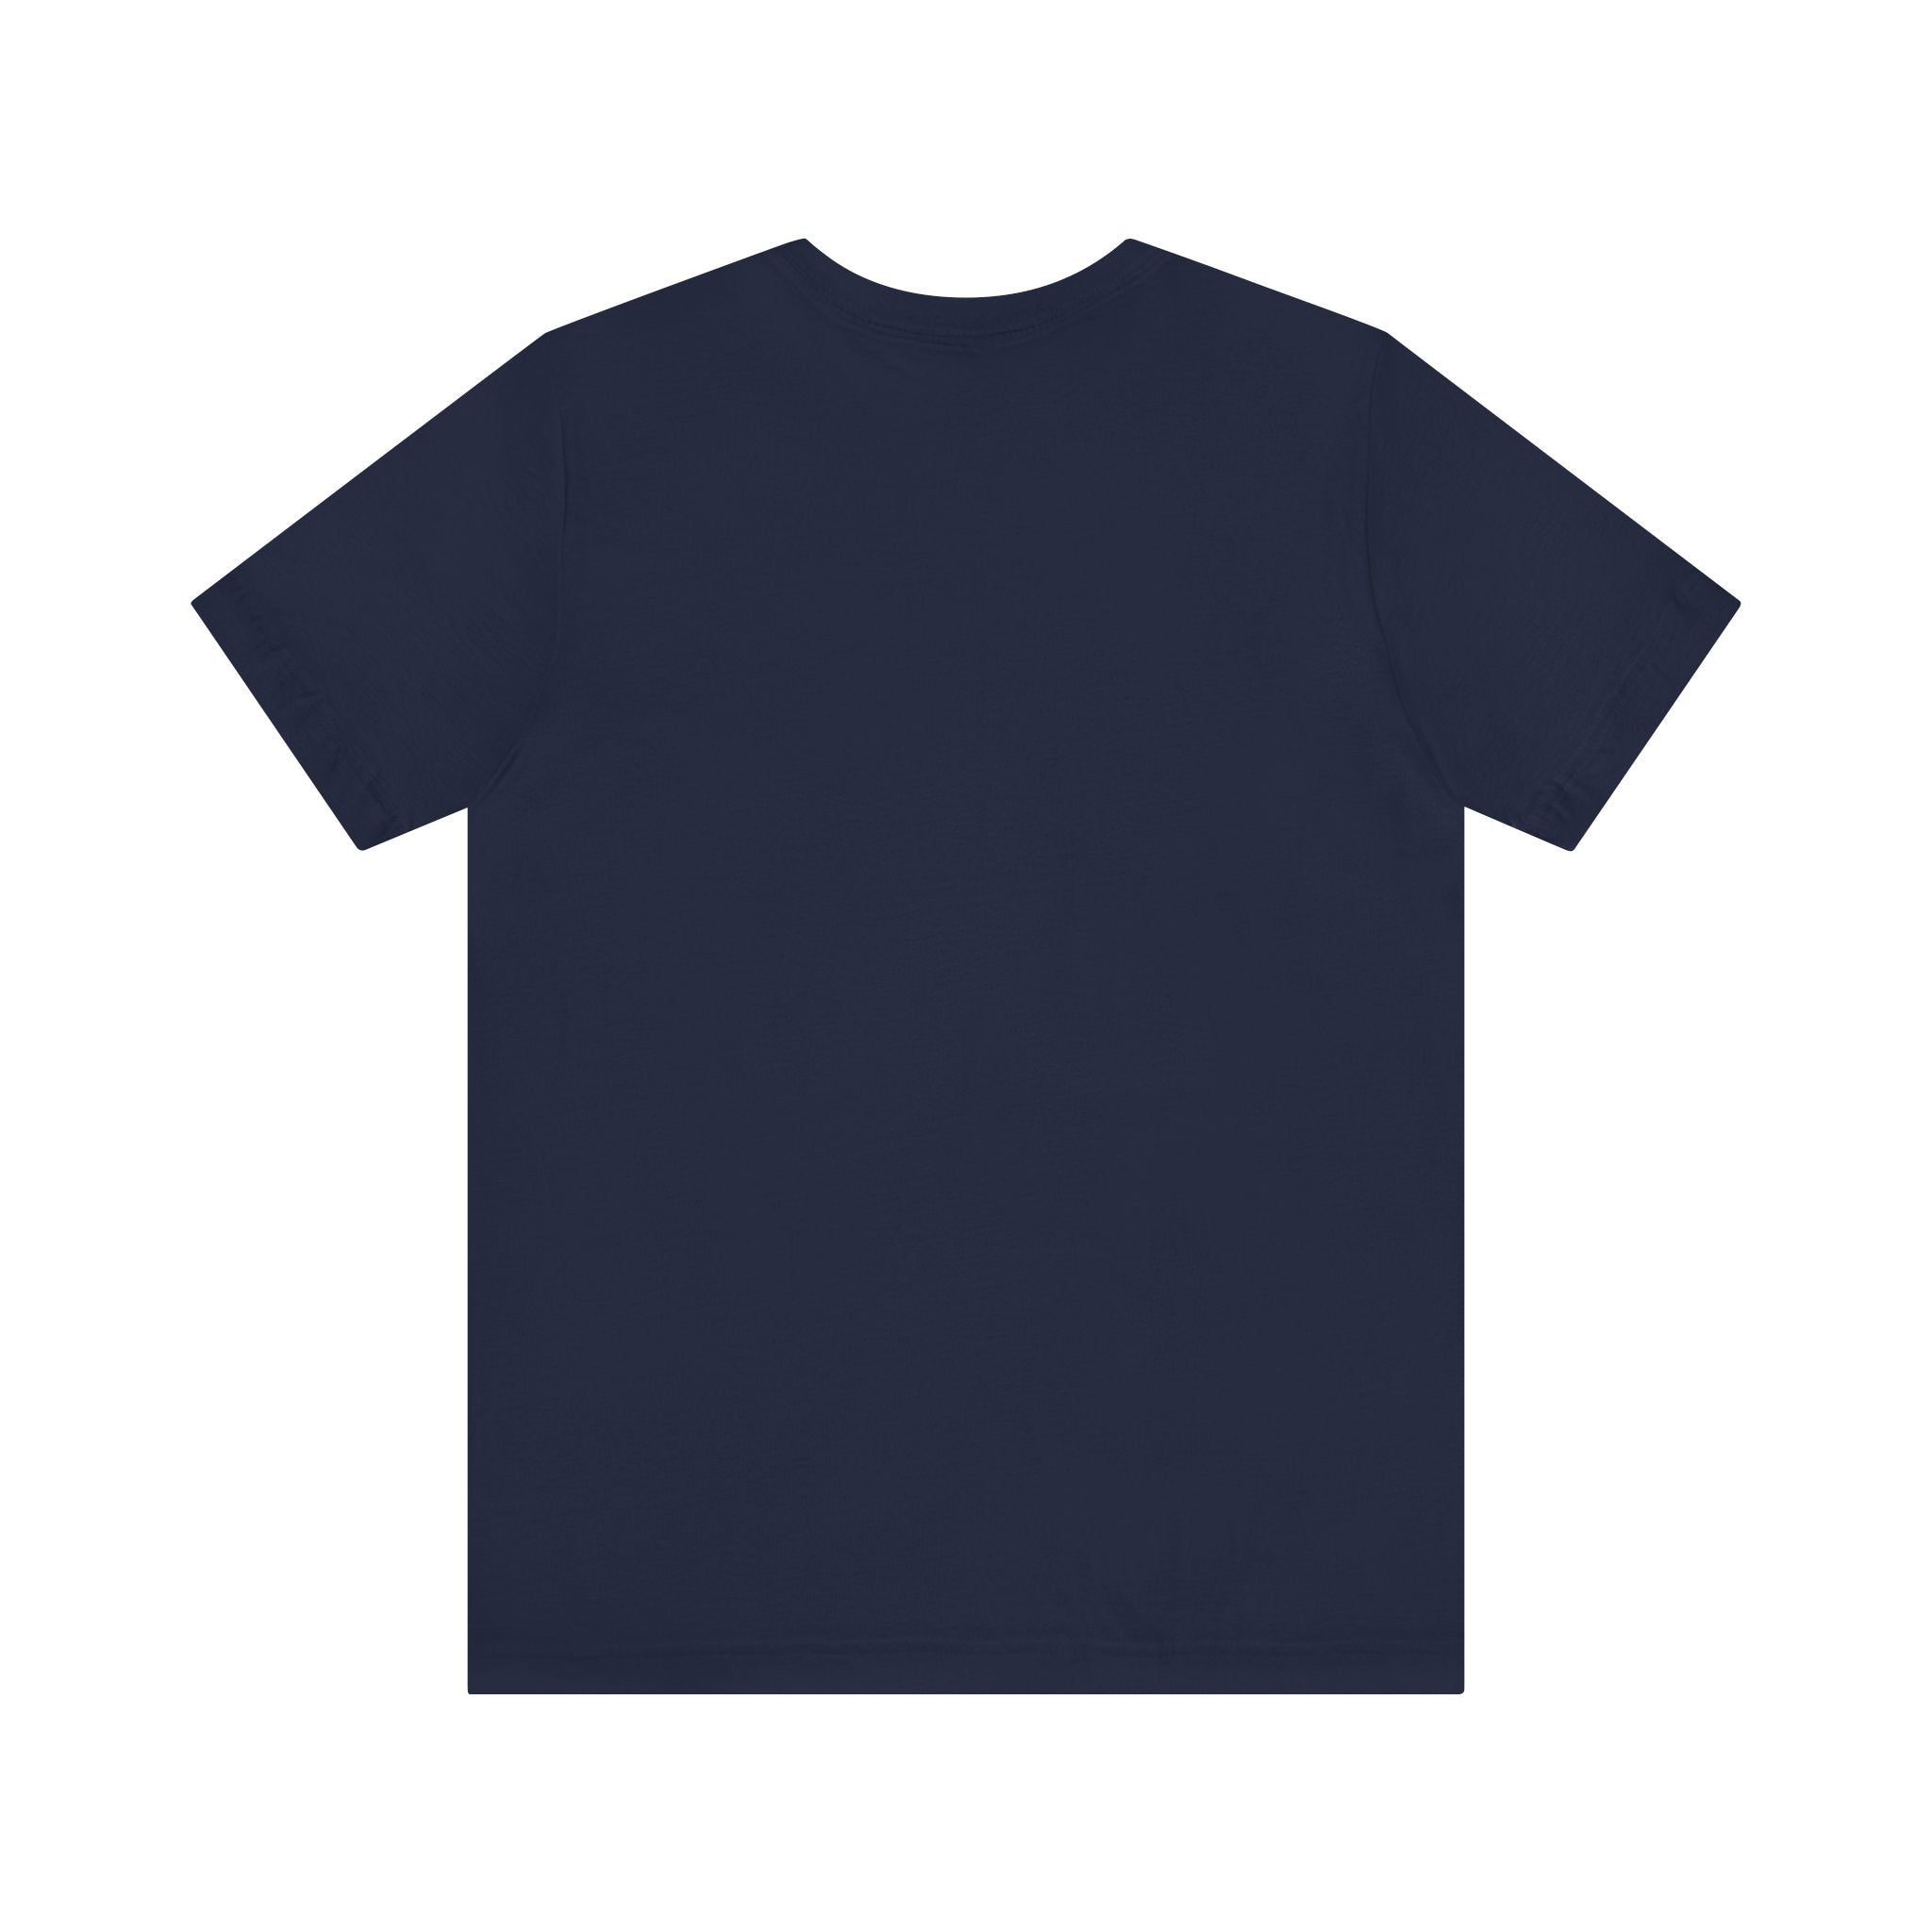 A plain navy blue C-Ho-Co-La-Te - T-Shirt with short sleeves, crafted from 100% Airlume cotton, displayed flat and facing the back.